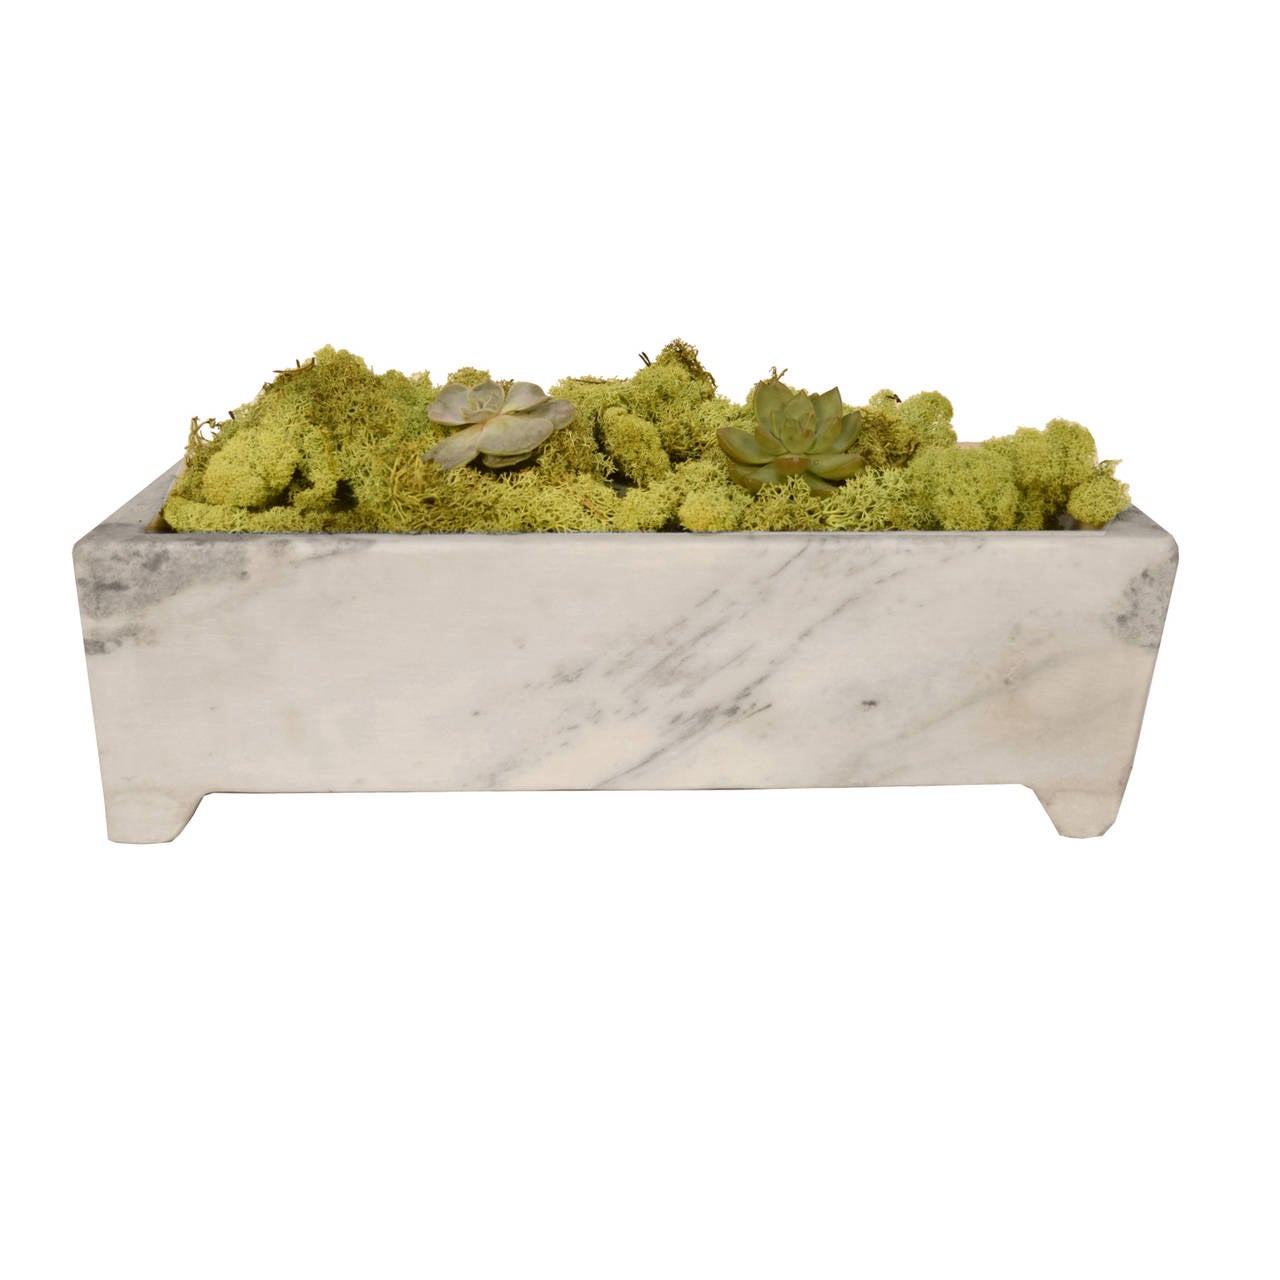 A petite marble trough from Shanxi province, China with a beveled lip, rounded edges and four feet.